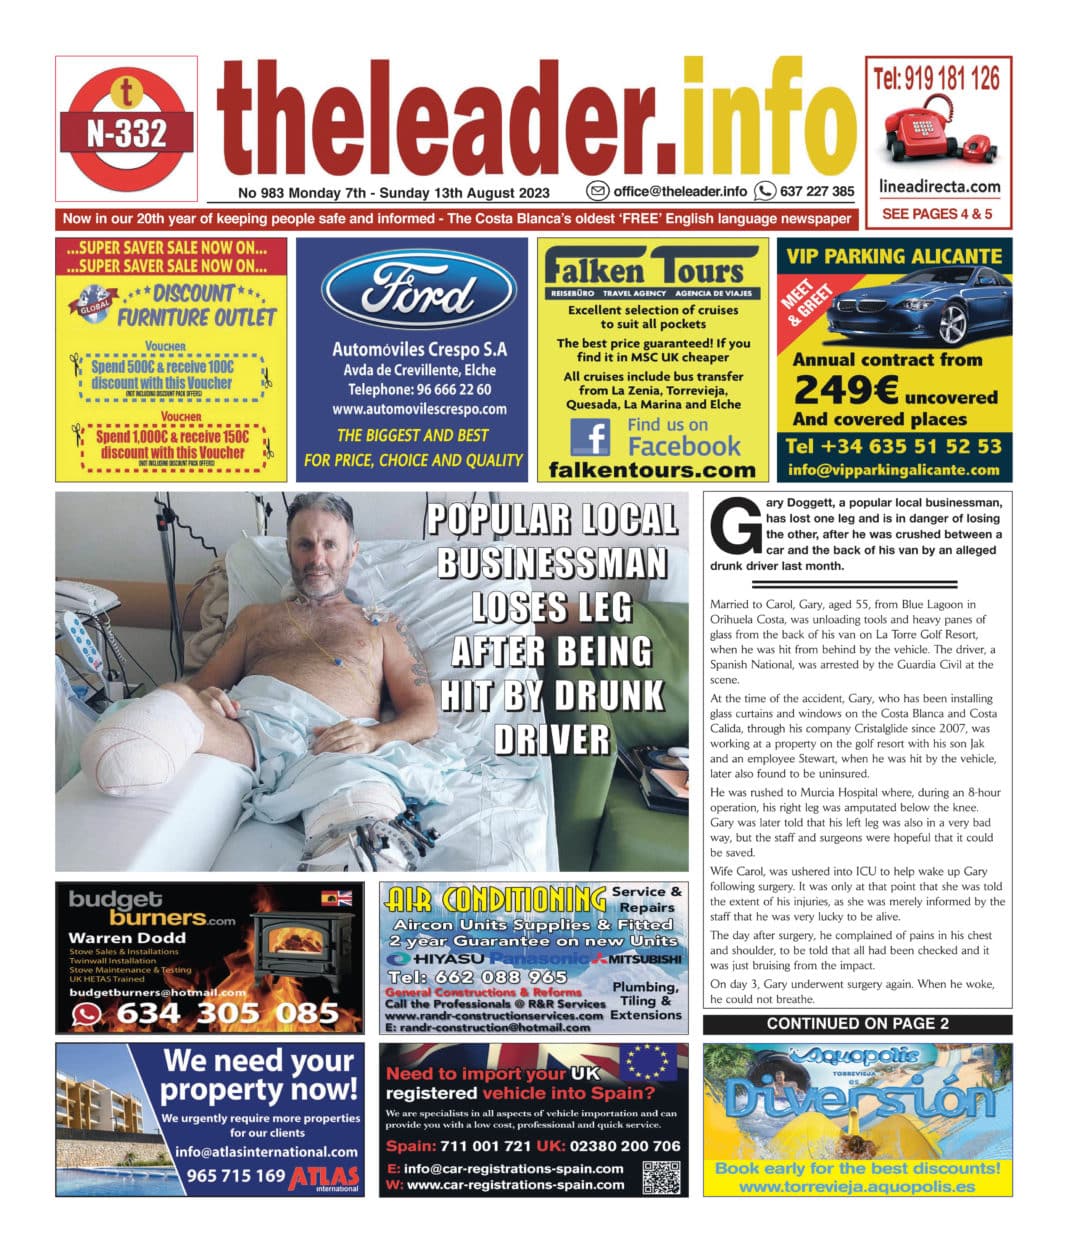 The Leader Newspaper 07 August 23 _ Edition 983